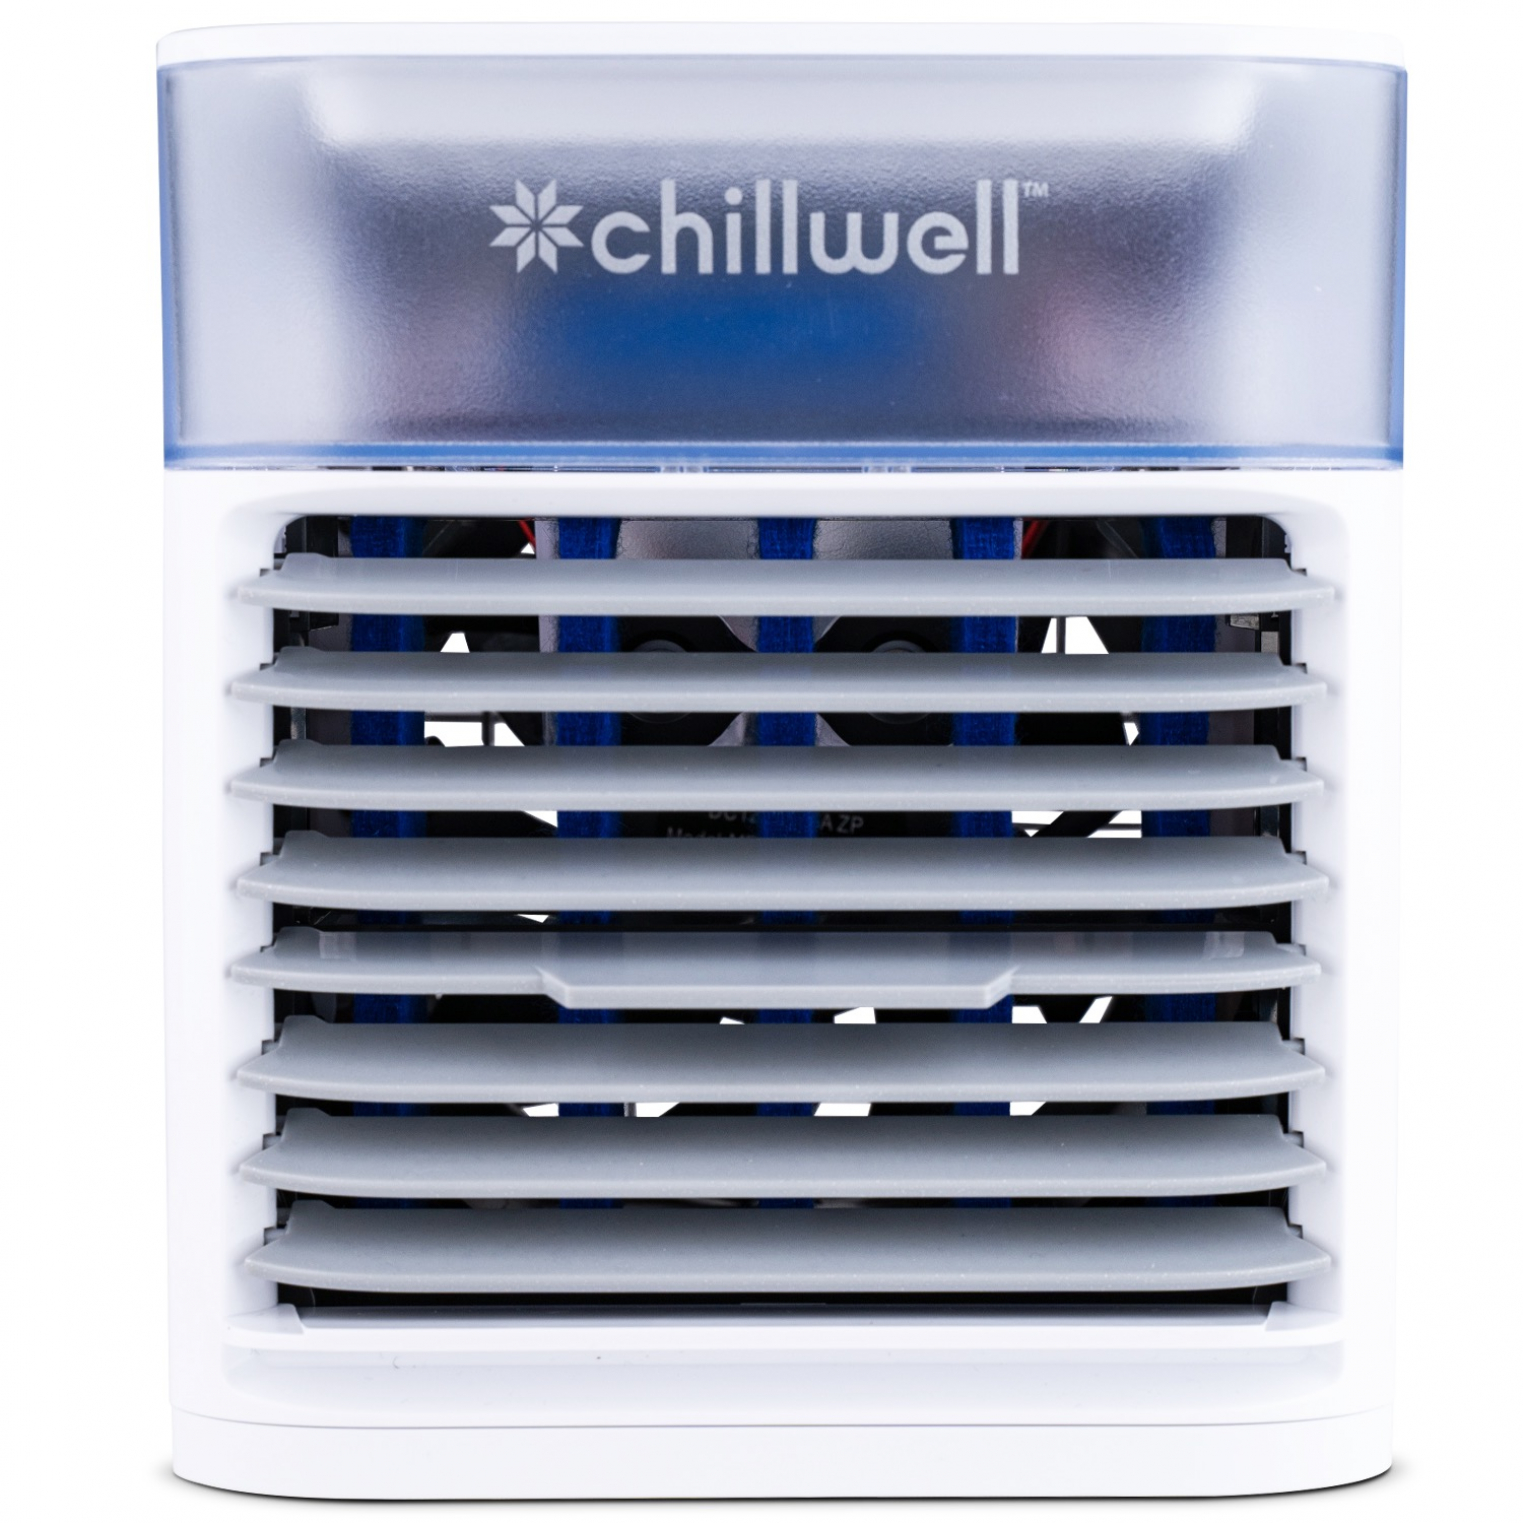 Chillwell AC Portable Evaporative Cooler Reviews